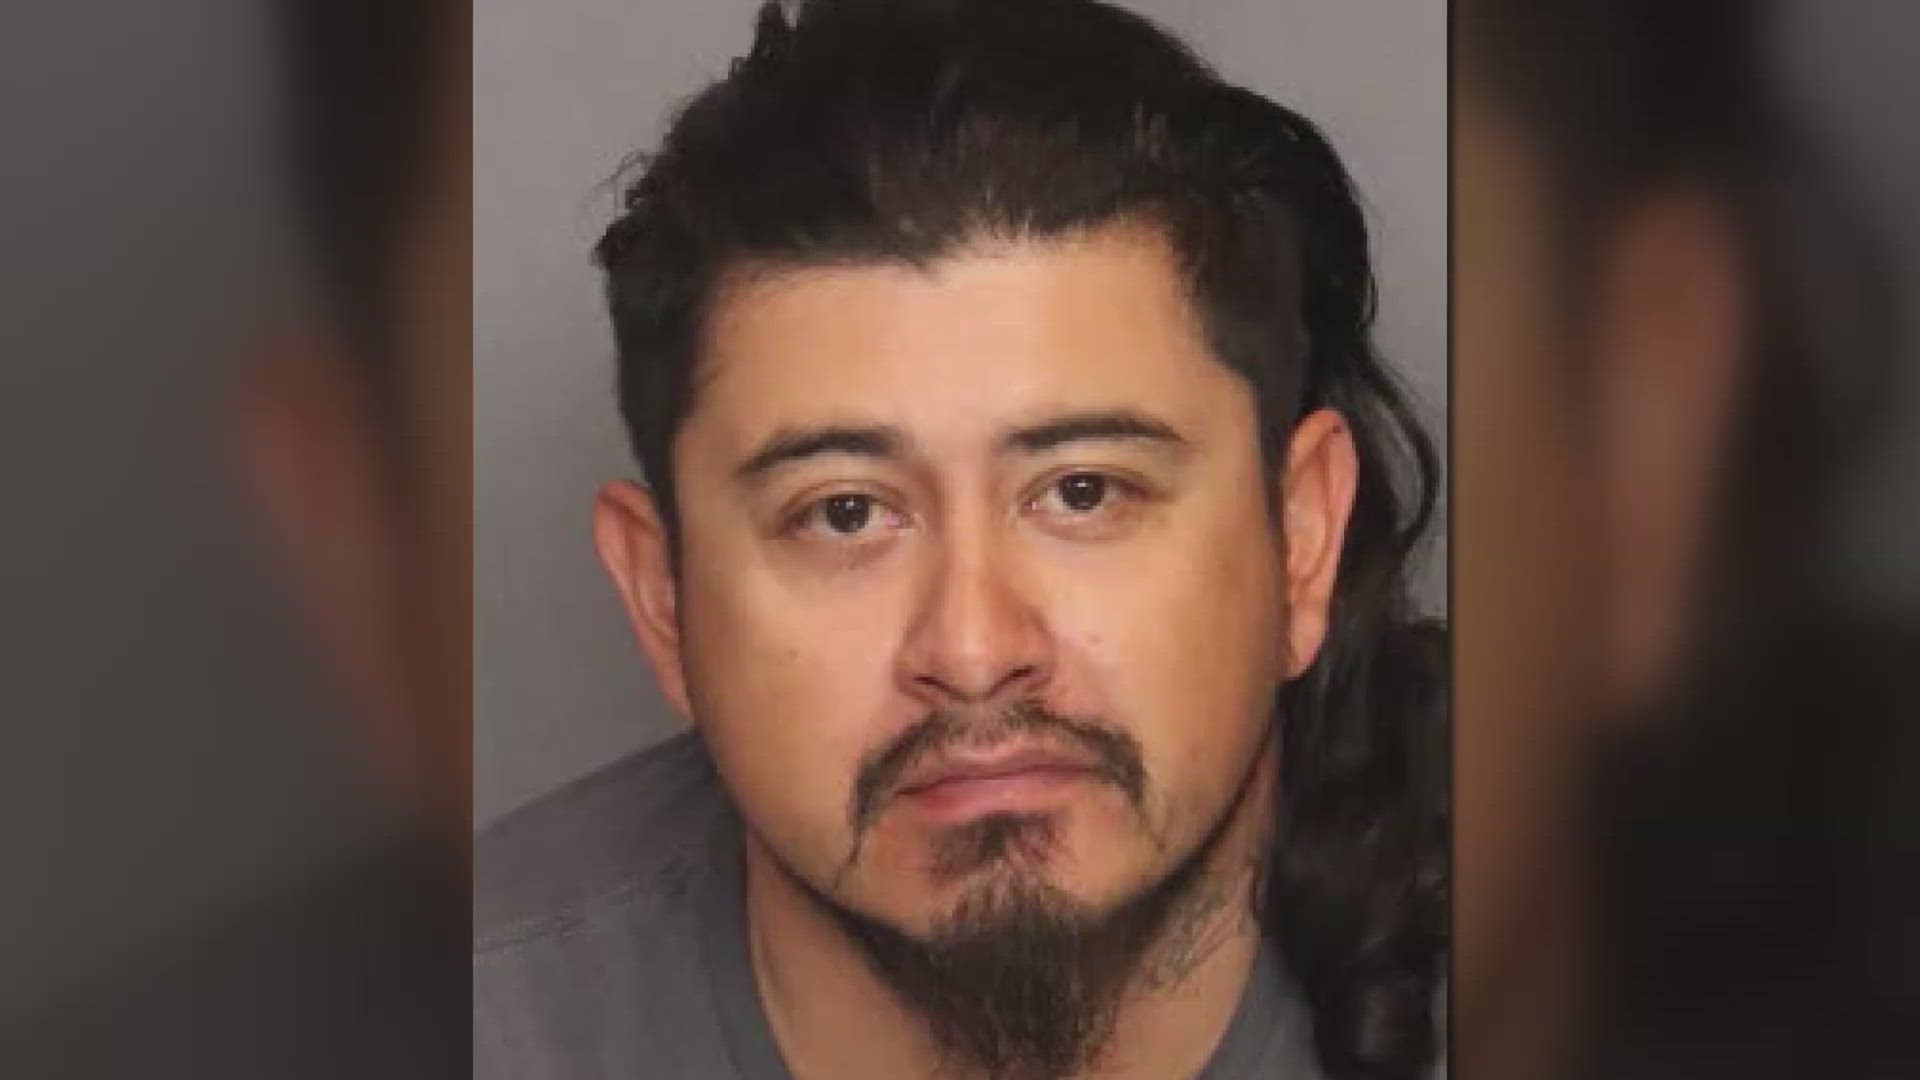 A 9-month-old infant arrived to an Oakland hospital Tuesday with major injuries related to alleged child abuse, according to Stockton police.